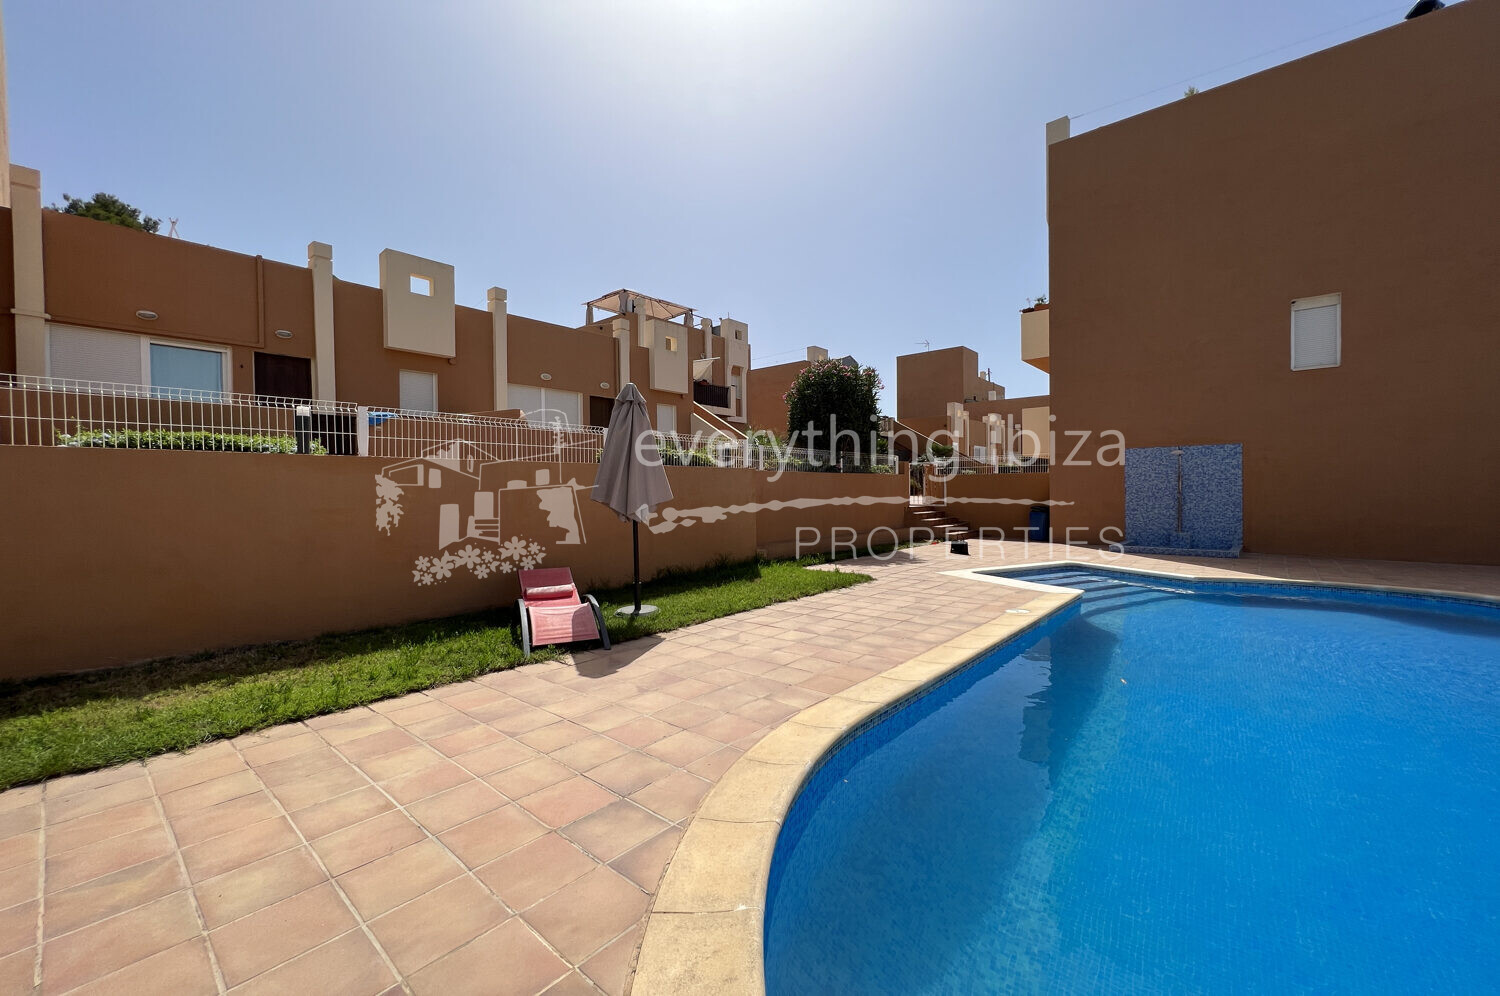 Contemporary Top Floor Apartment with Roof Terrace, ref. 1469, for sale in Ibiza by everything ibiza Properties